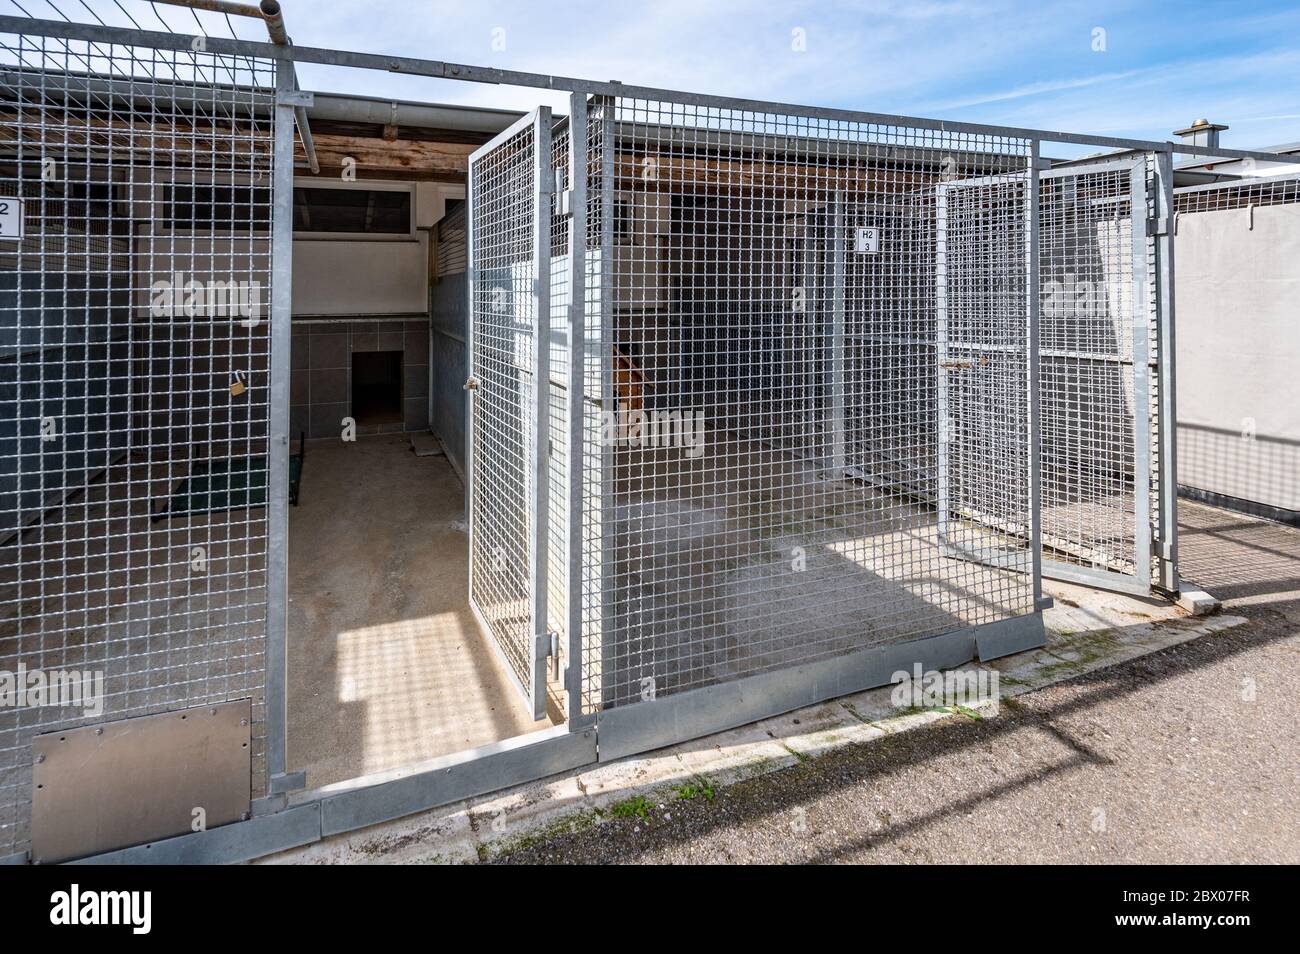 cat kennels for shelters